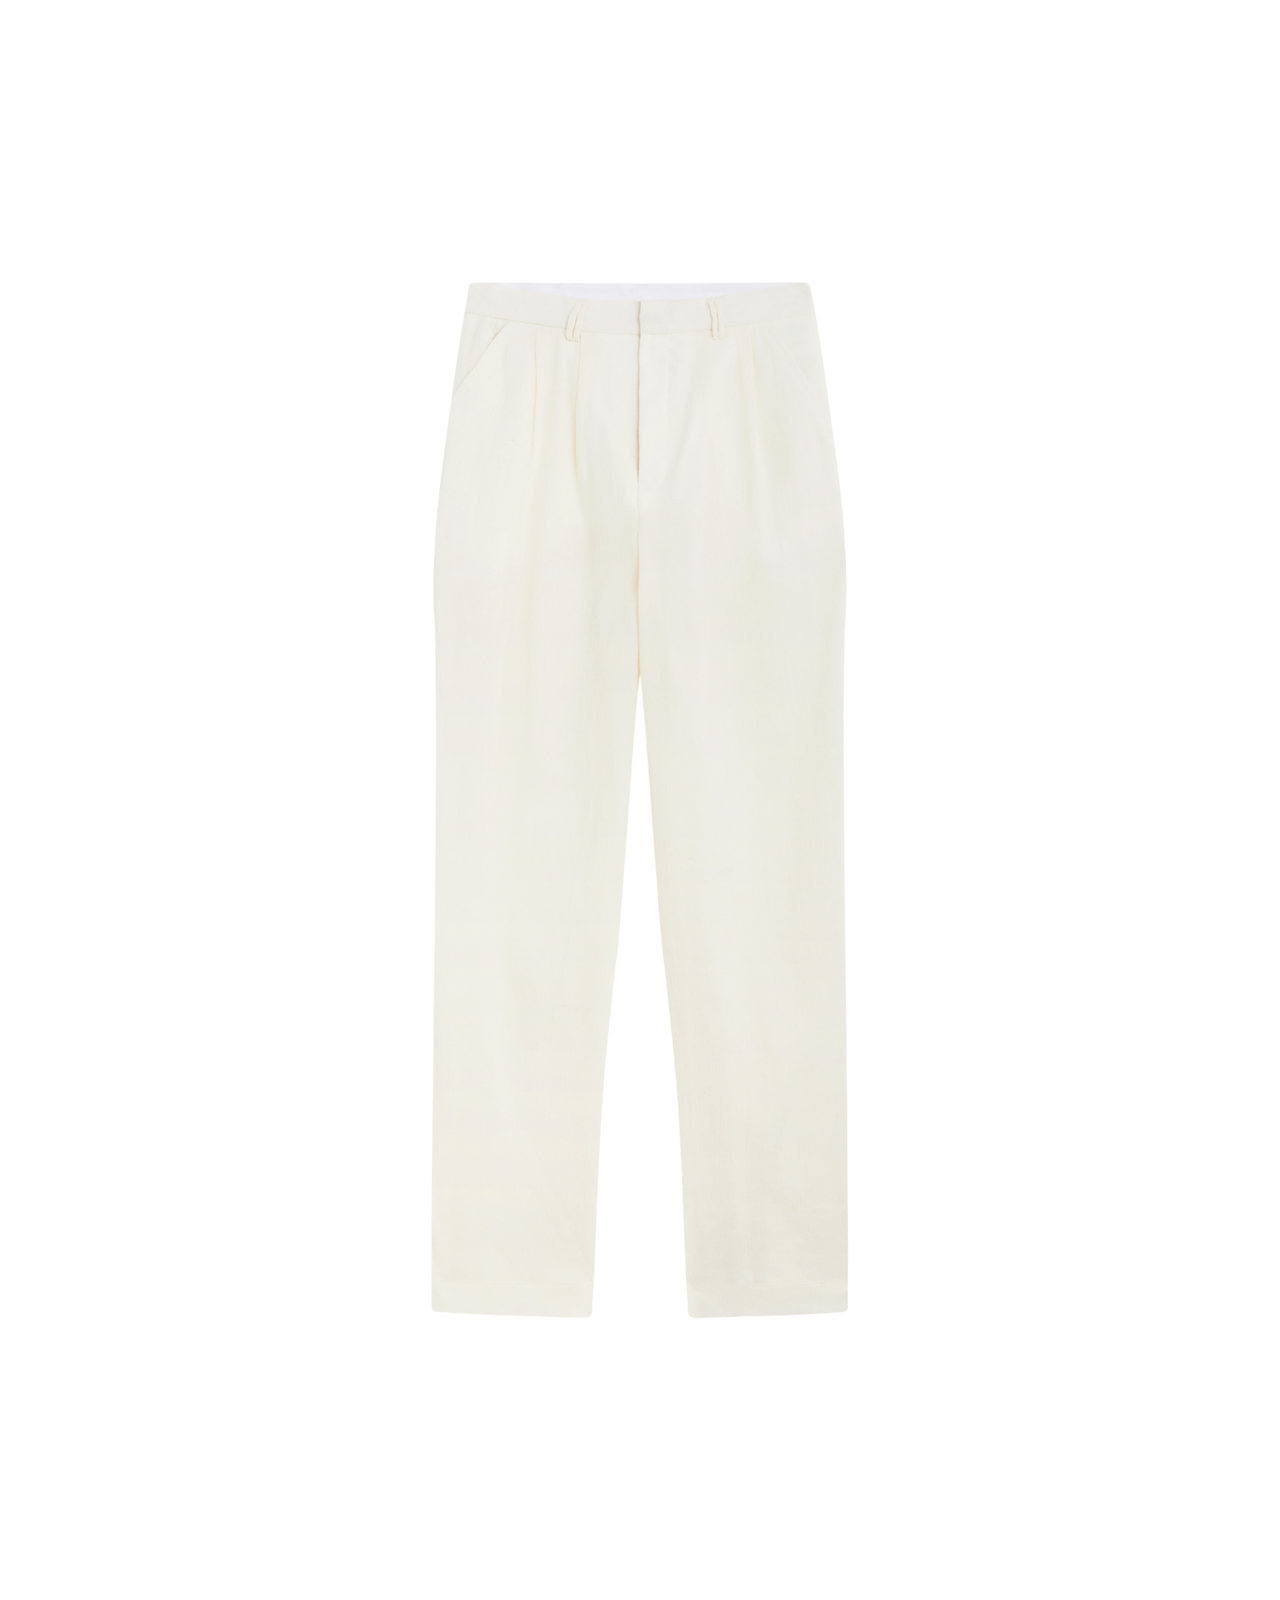 Flow Tailored Pants Natural White In Natural White